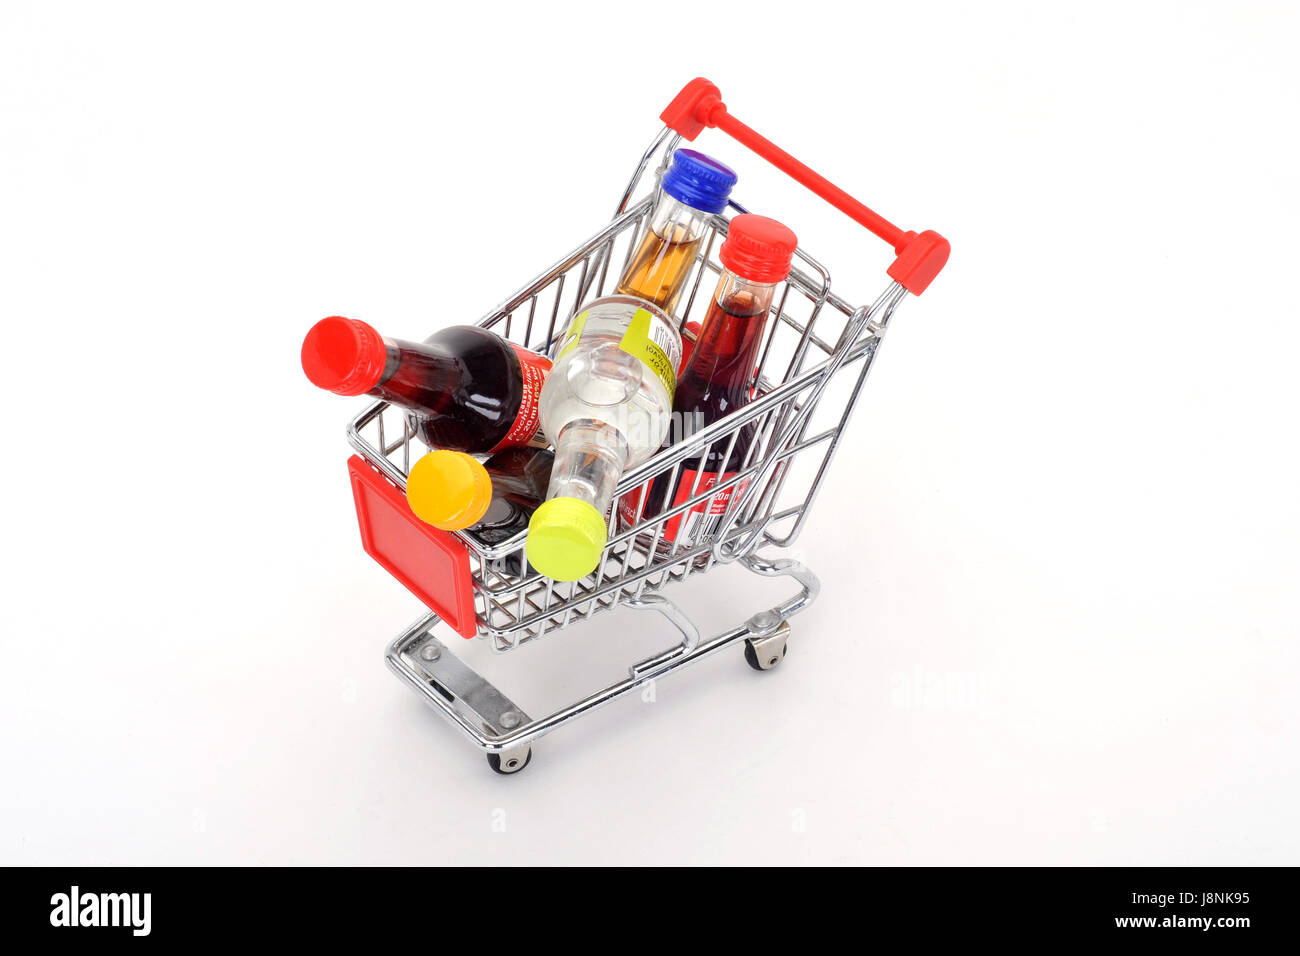 alcohol, bottles, trolley, cart, vodka, consumption of alcohol, alcohol Stock Photo